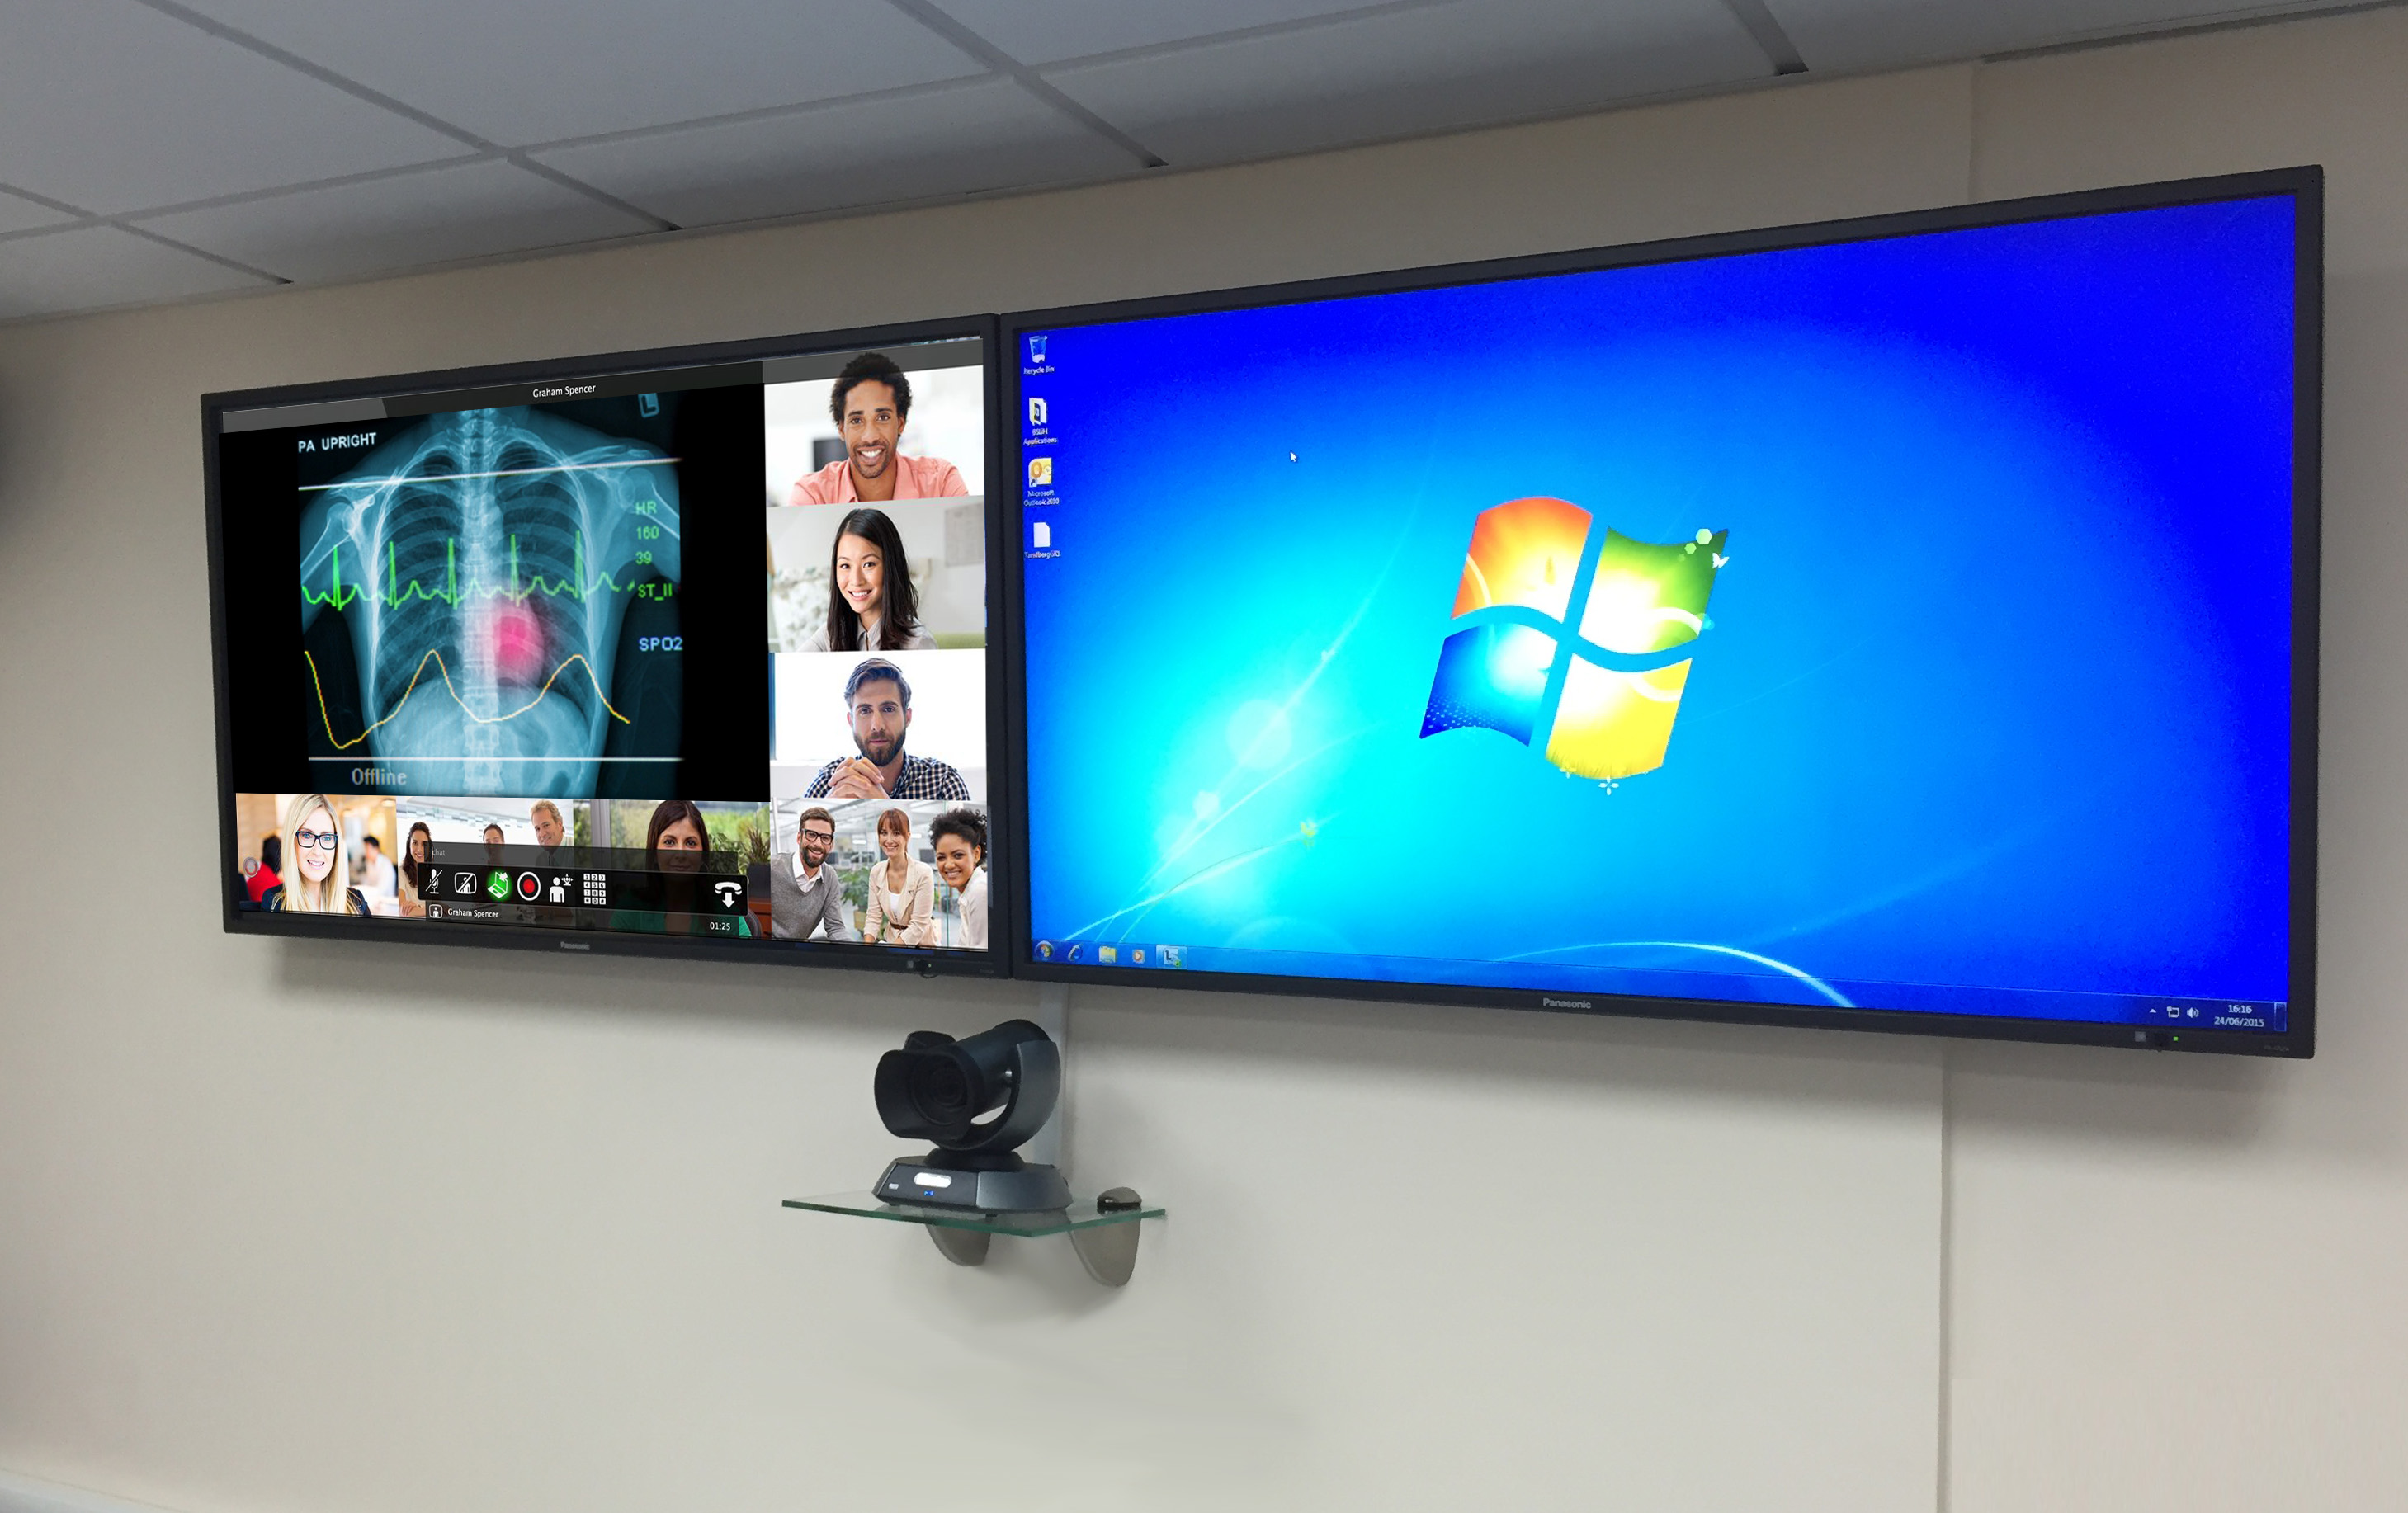 BSUH Lifesize Video Conferencing dual screen display